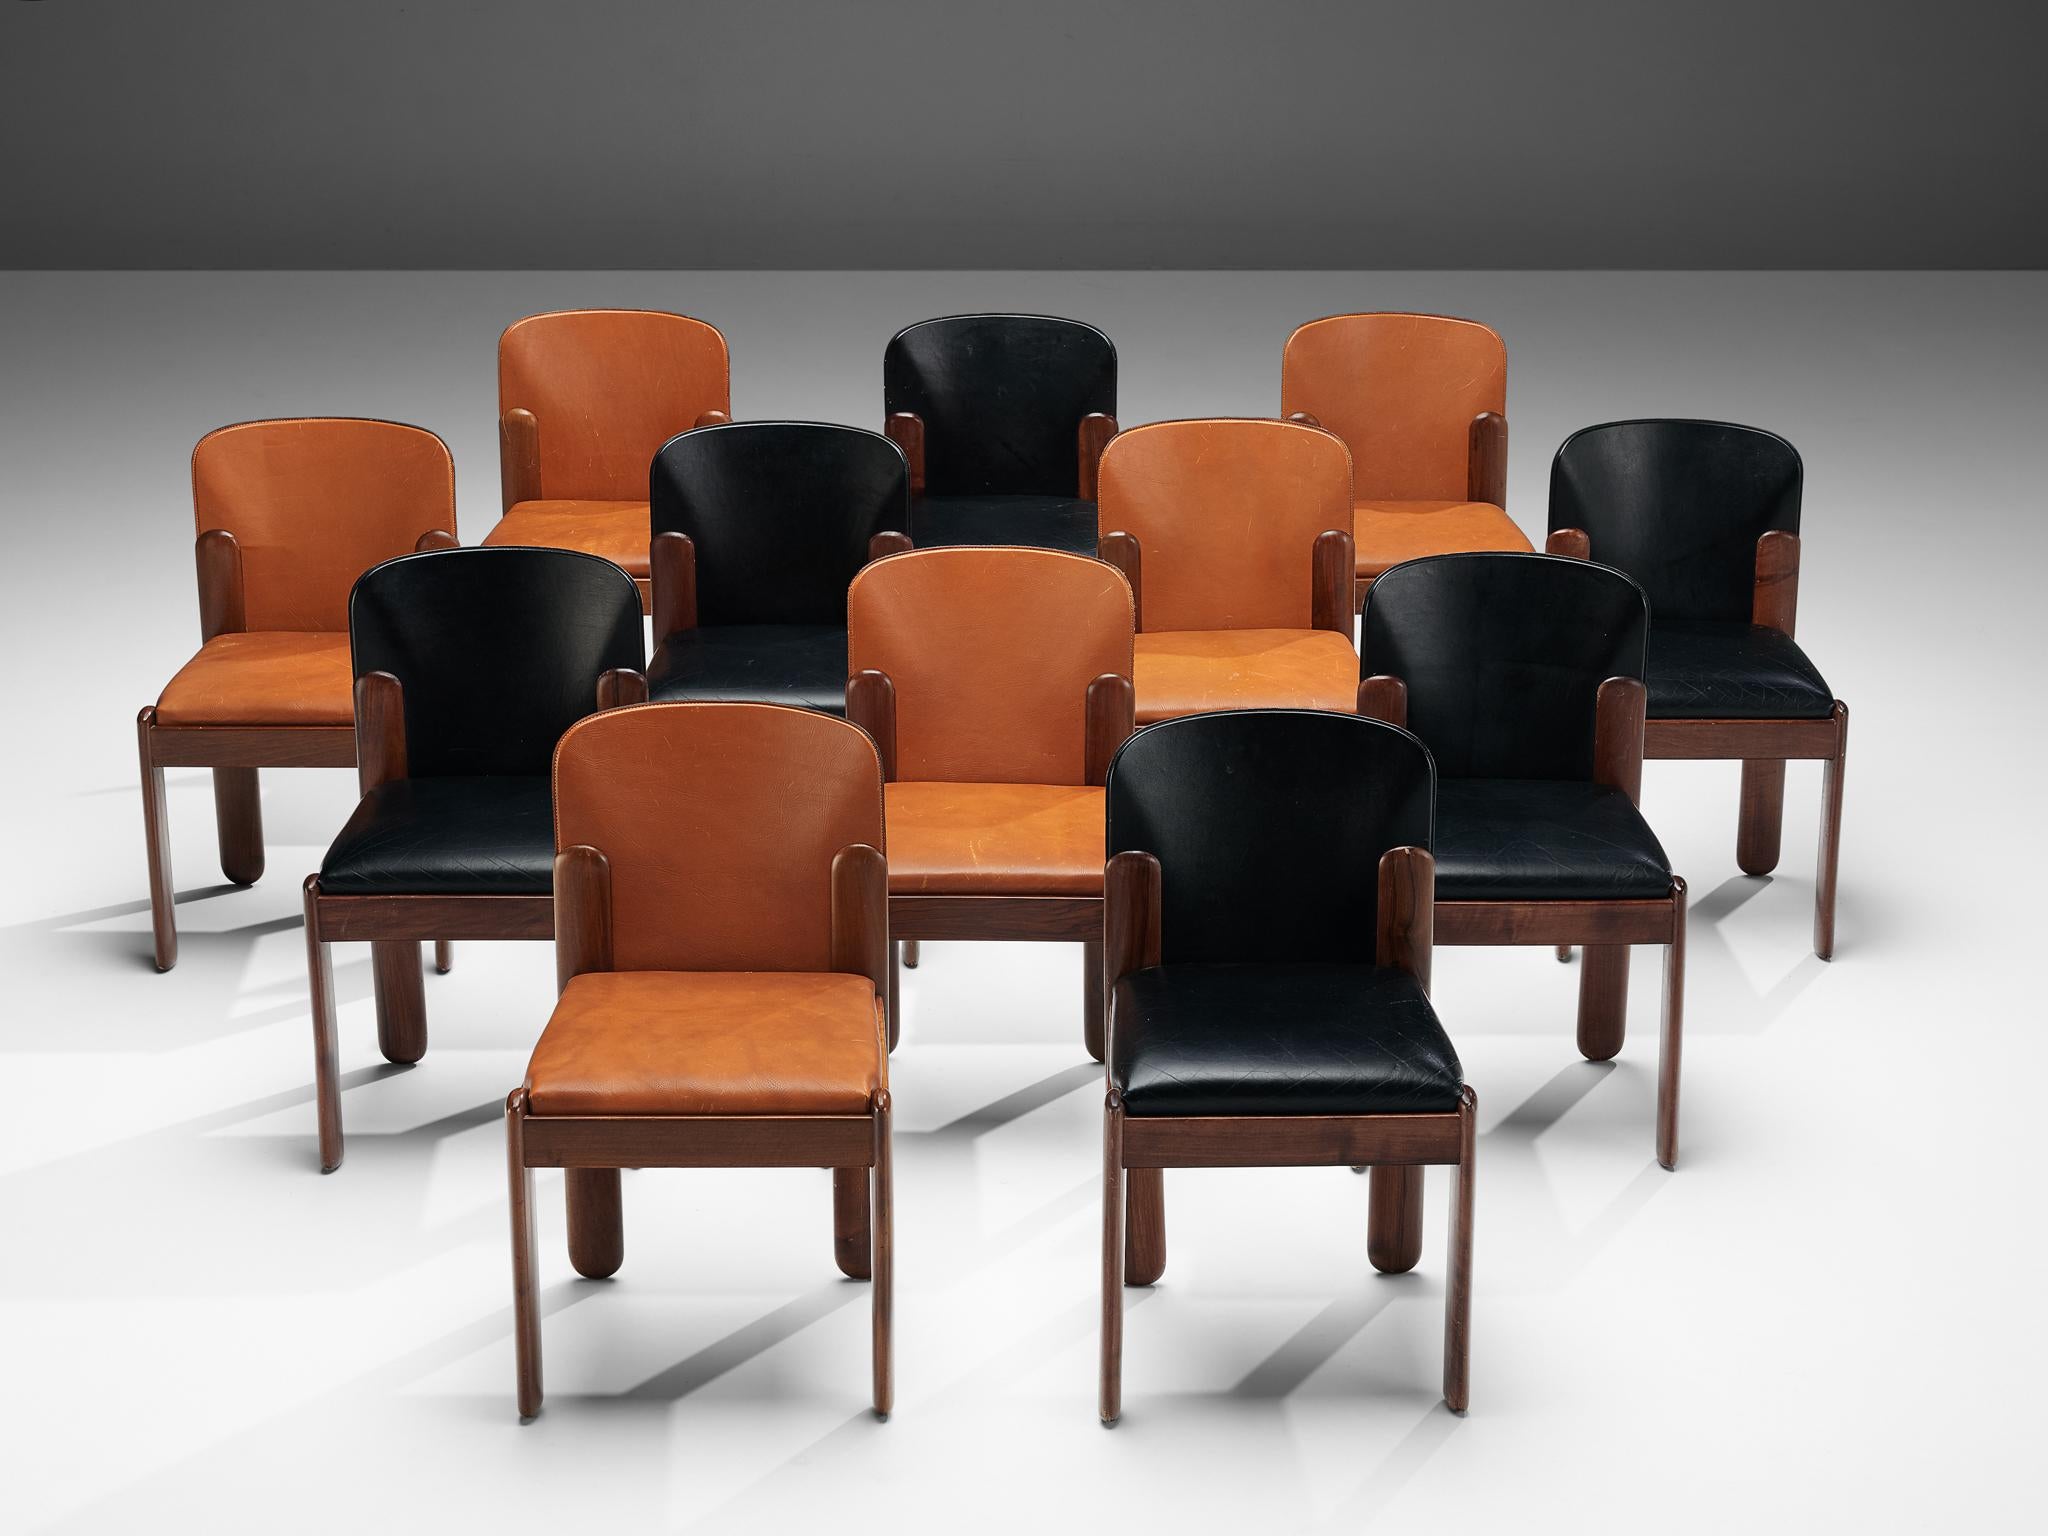 Silvio Coppola for Bernini, twelve dining chairs, model 330, black and brown leather and stained beech, Italy, 1960s

Wonderful bicolor set of twelve dining chairs by Italian designer Silvio Coppola. These aesthetically well balanced chairs strongly